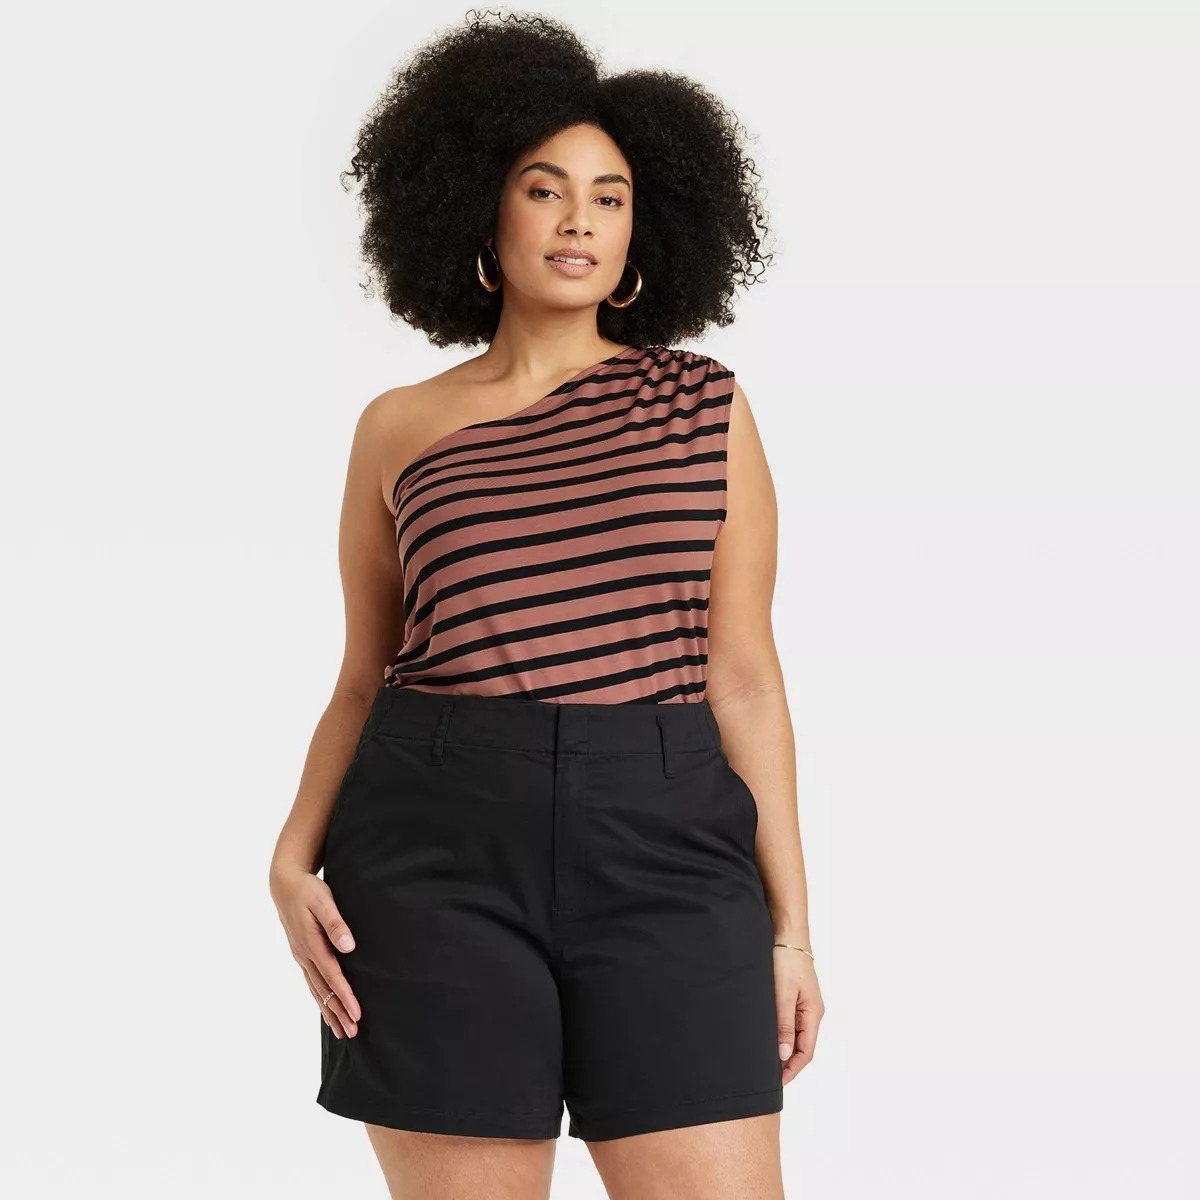 Model in the one-shoulder top in brown with black stripes